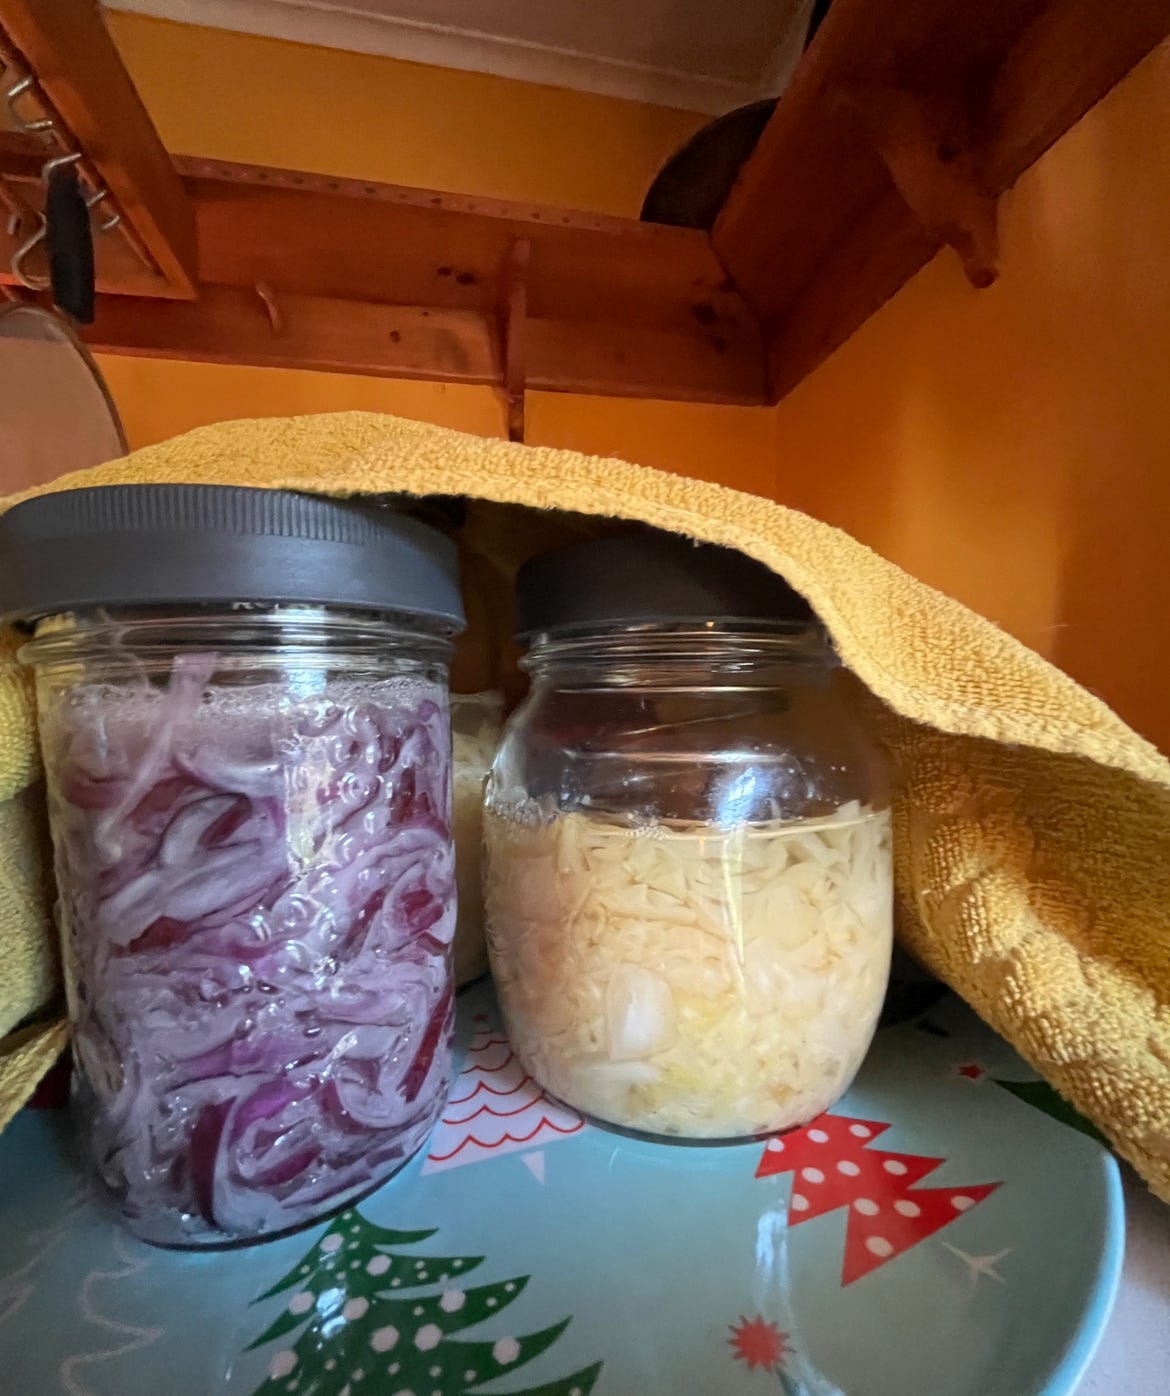 A jar of homemade sauerkraut and a jar of homemade red onion pickles peek out from beneath a towel on top of my fridge